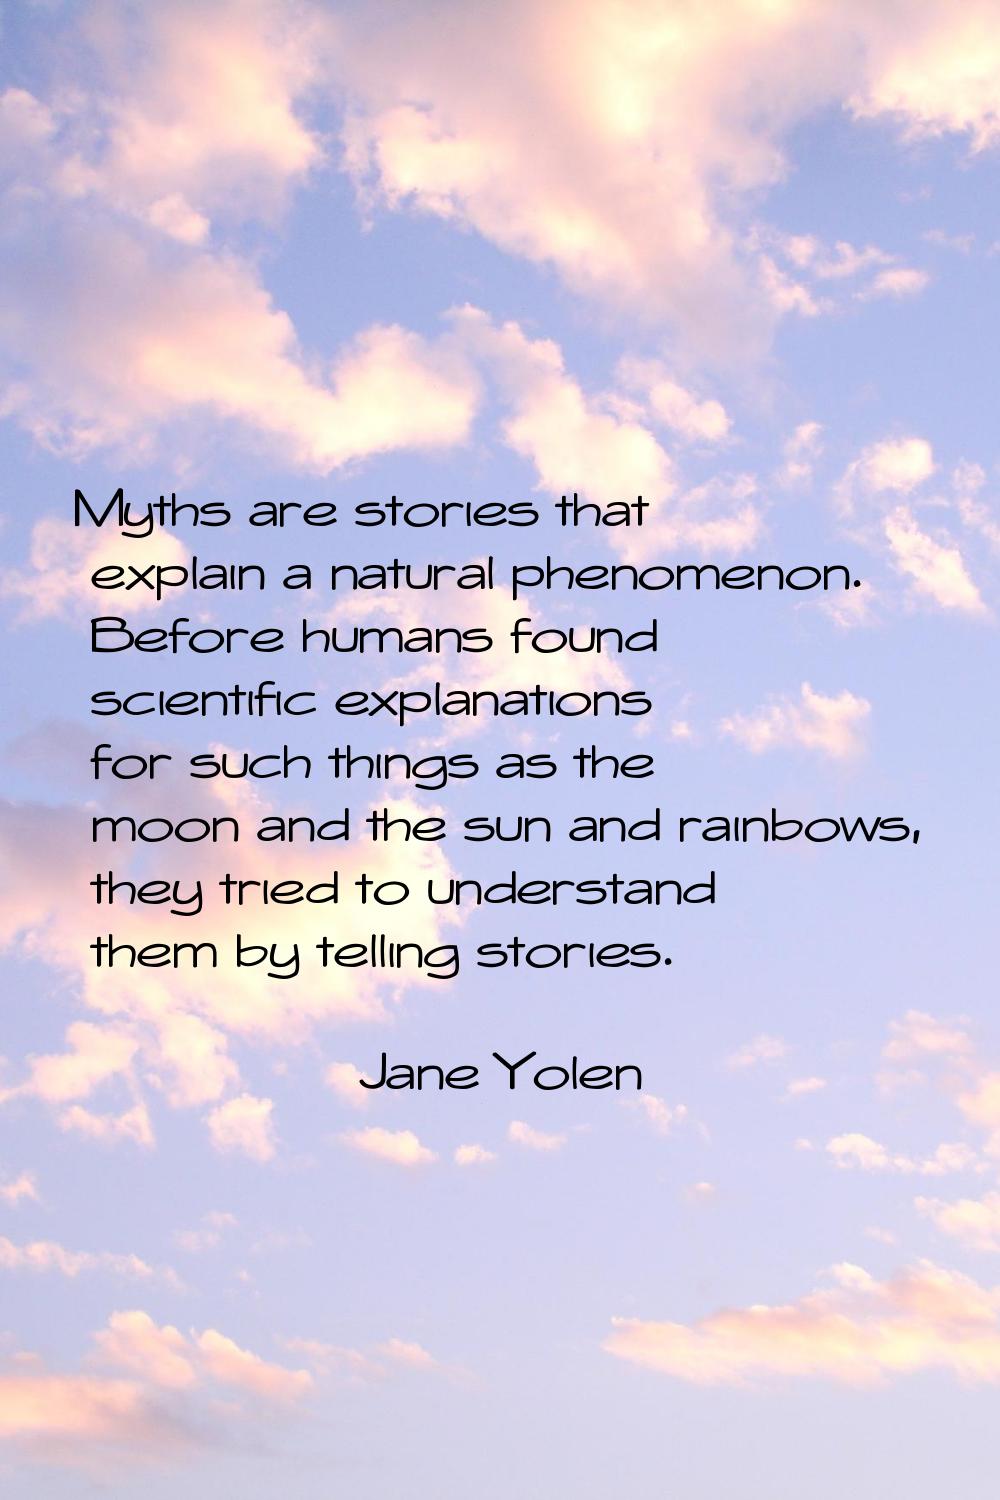 Myths are stories that explain a natural phenomenon. Before humans found scientific explanations fo